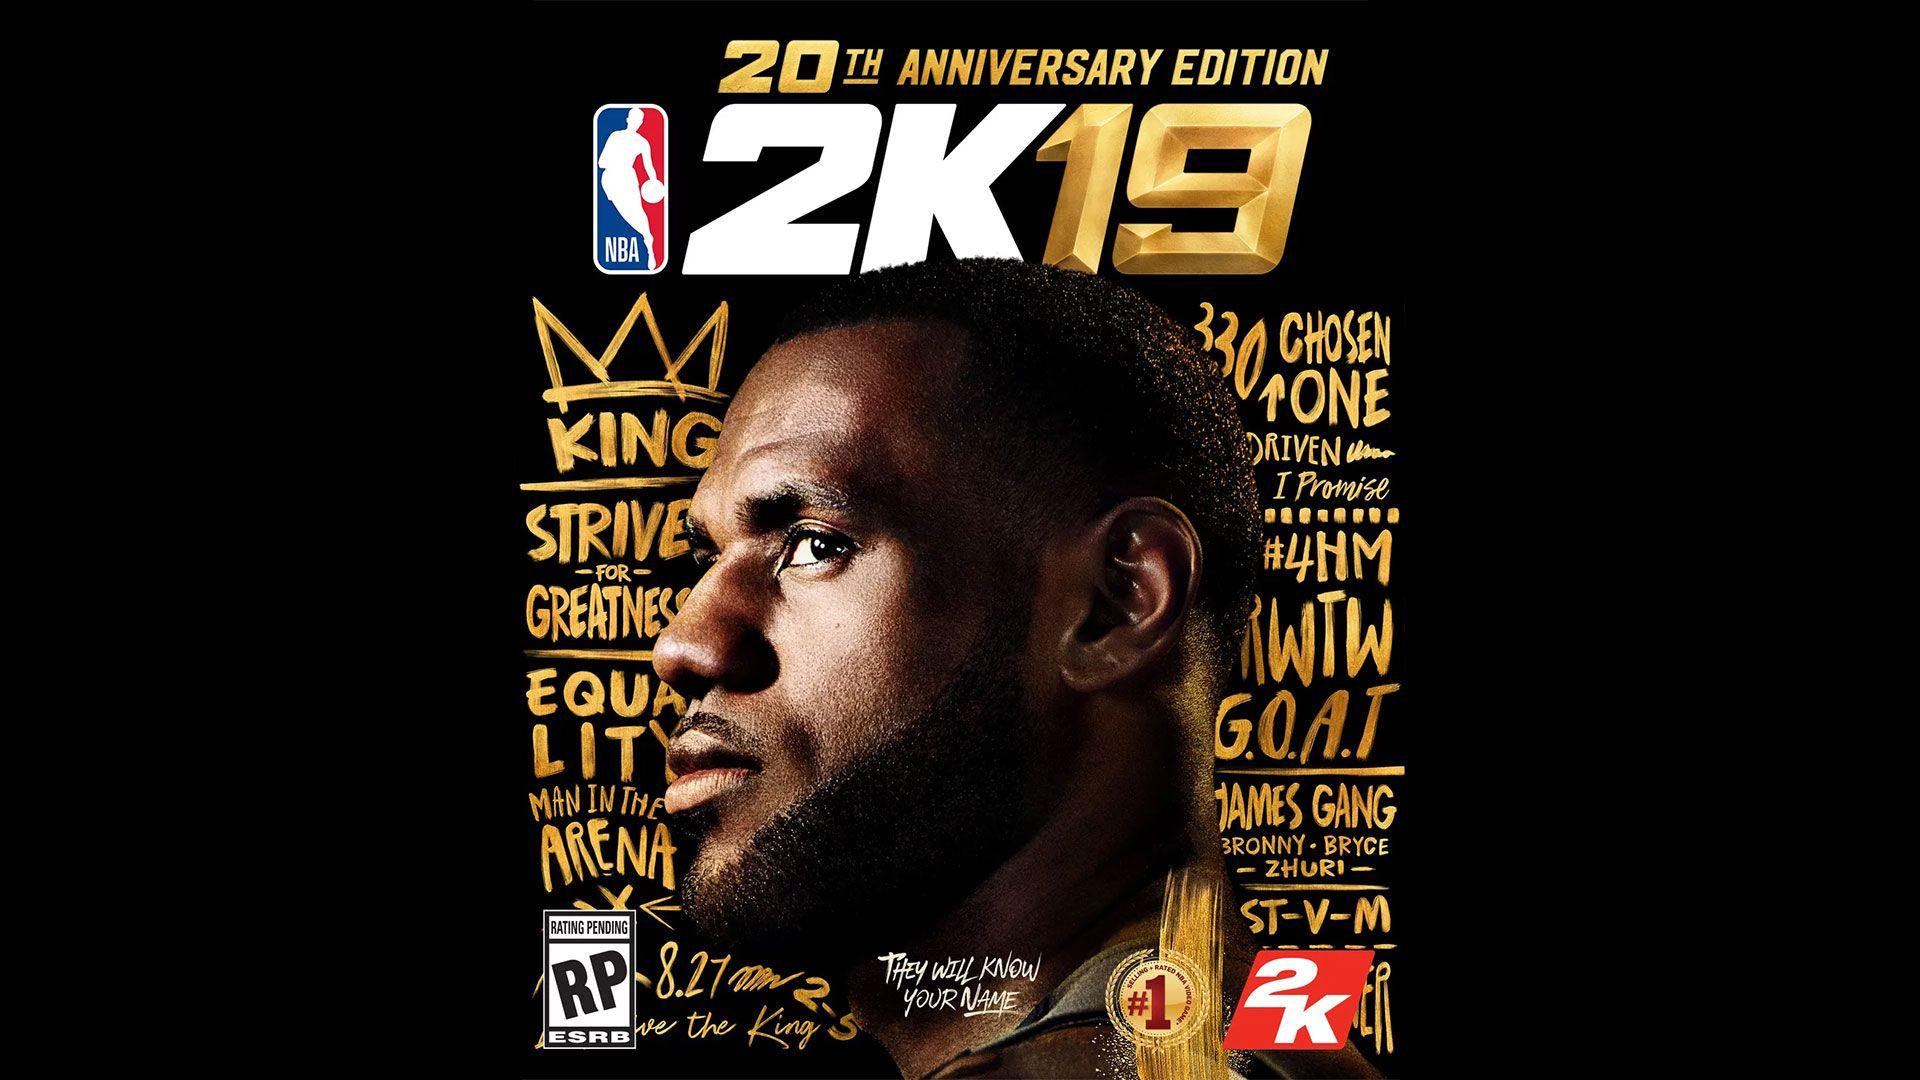 LeBron James Is NBA 2K19's Cover Star